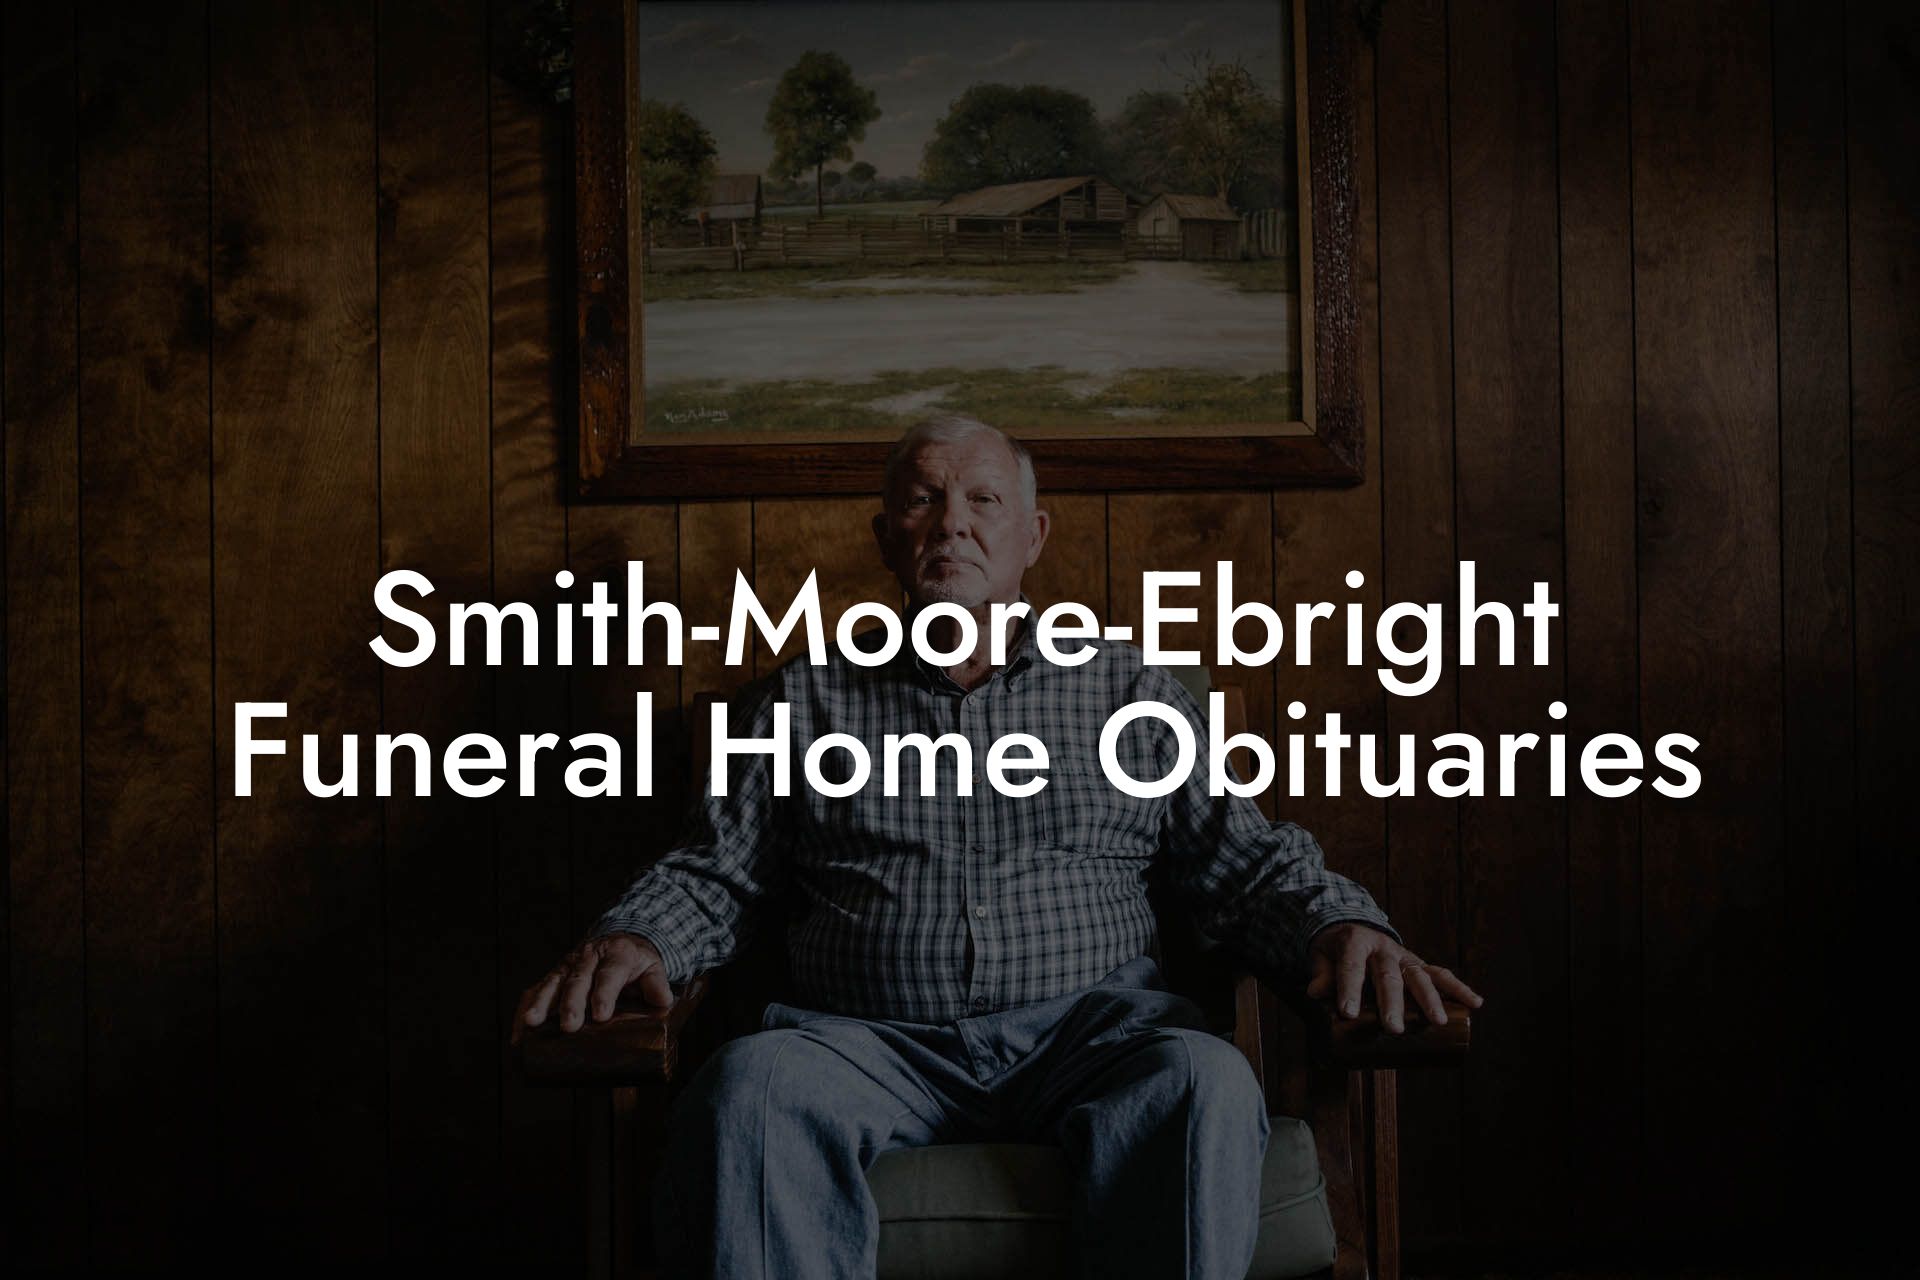 Smith-Moore-Ebright Funeral Home Obituaries